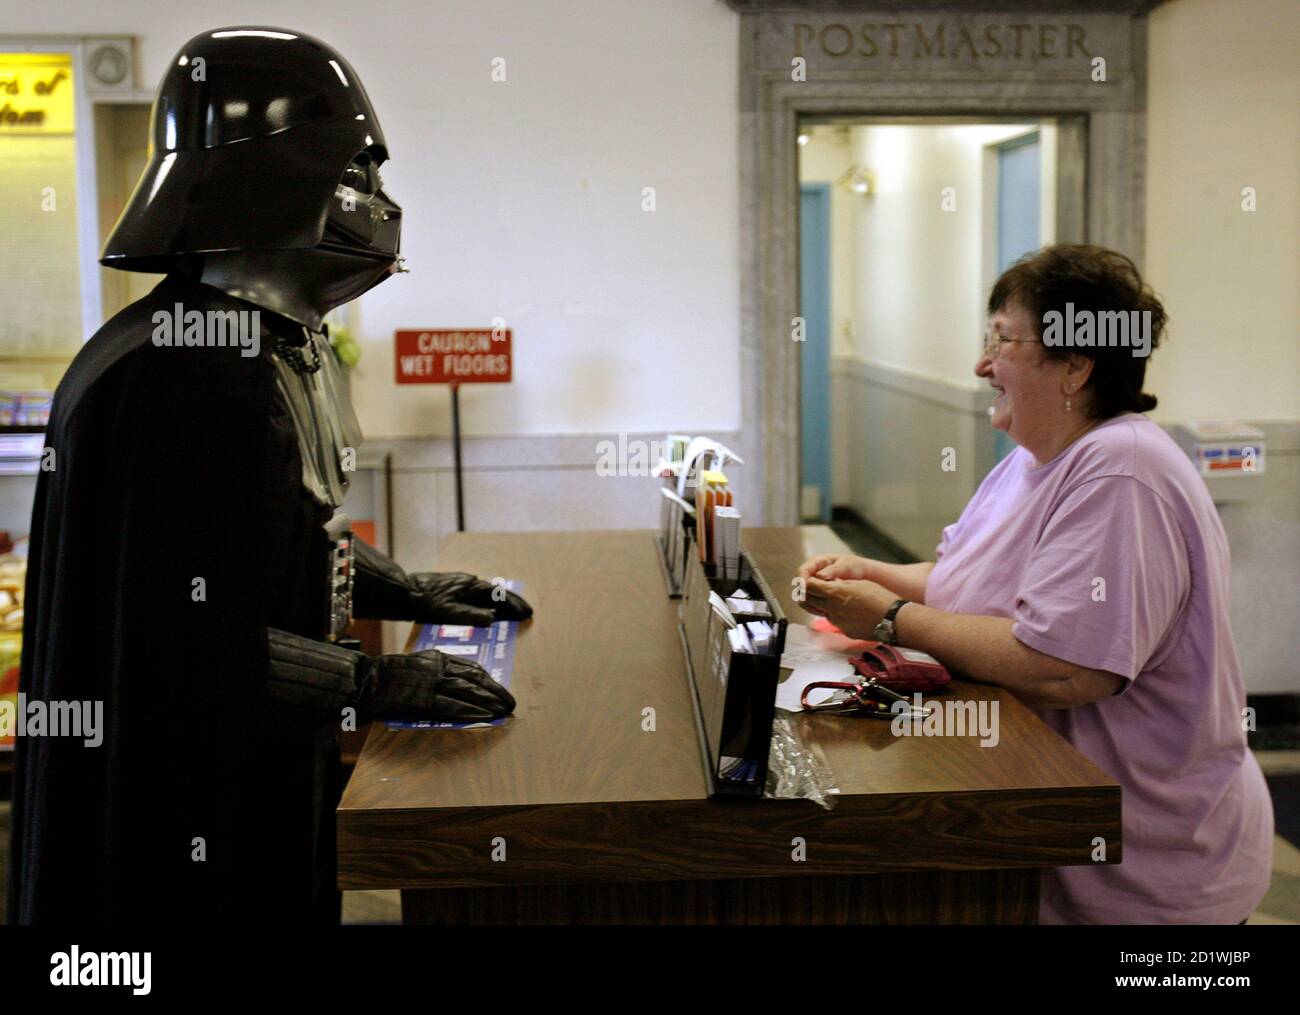 Jeff Gambell (L), dressed as Darth Vader from the Star Wars movies, talks  to Ellen Smith at the . Post Office in Norwood, Massachusetts May 25,  2007. The . Postal Service released